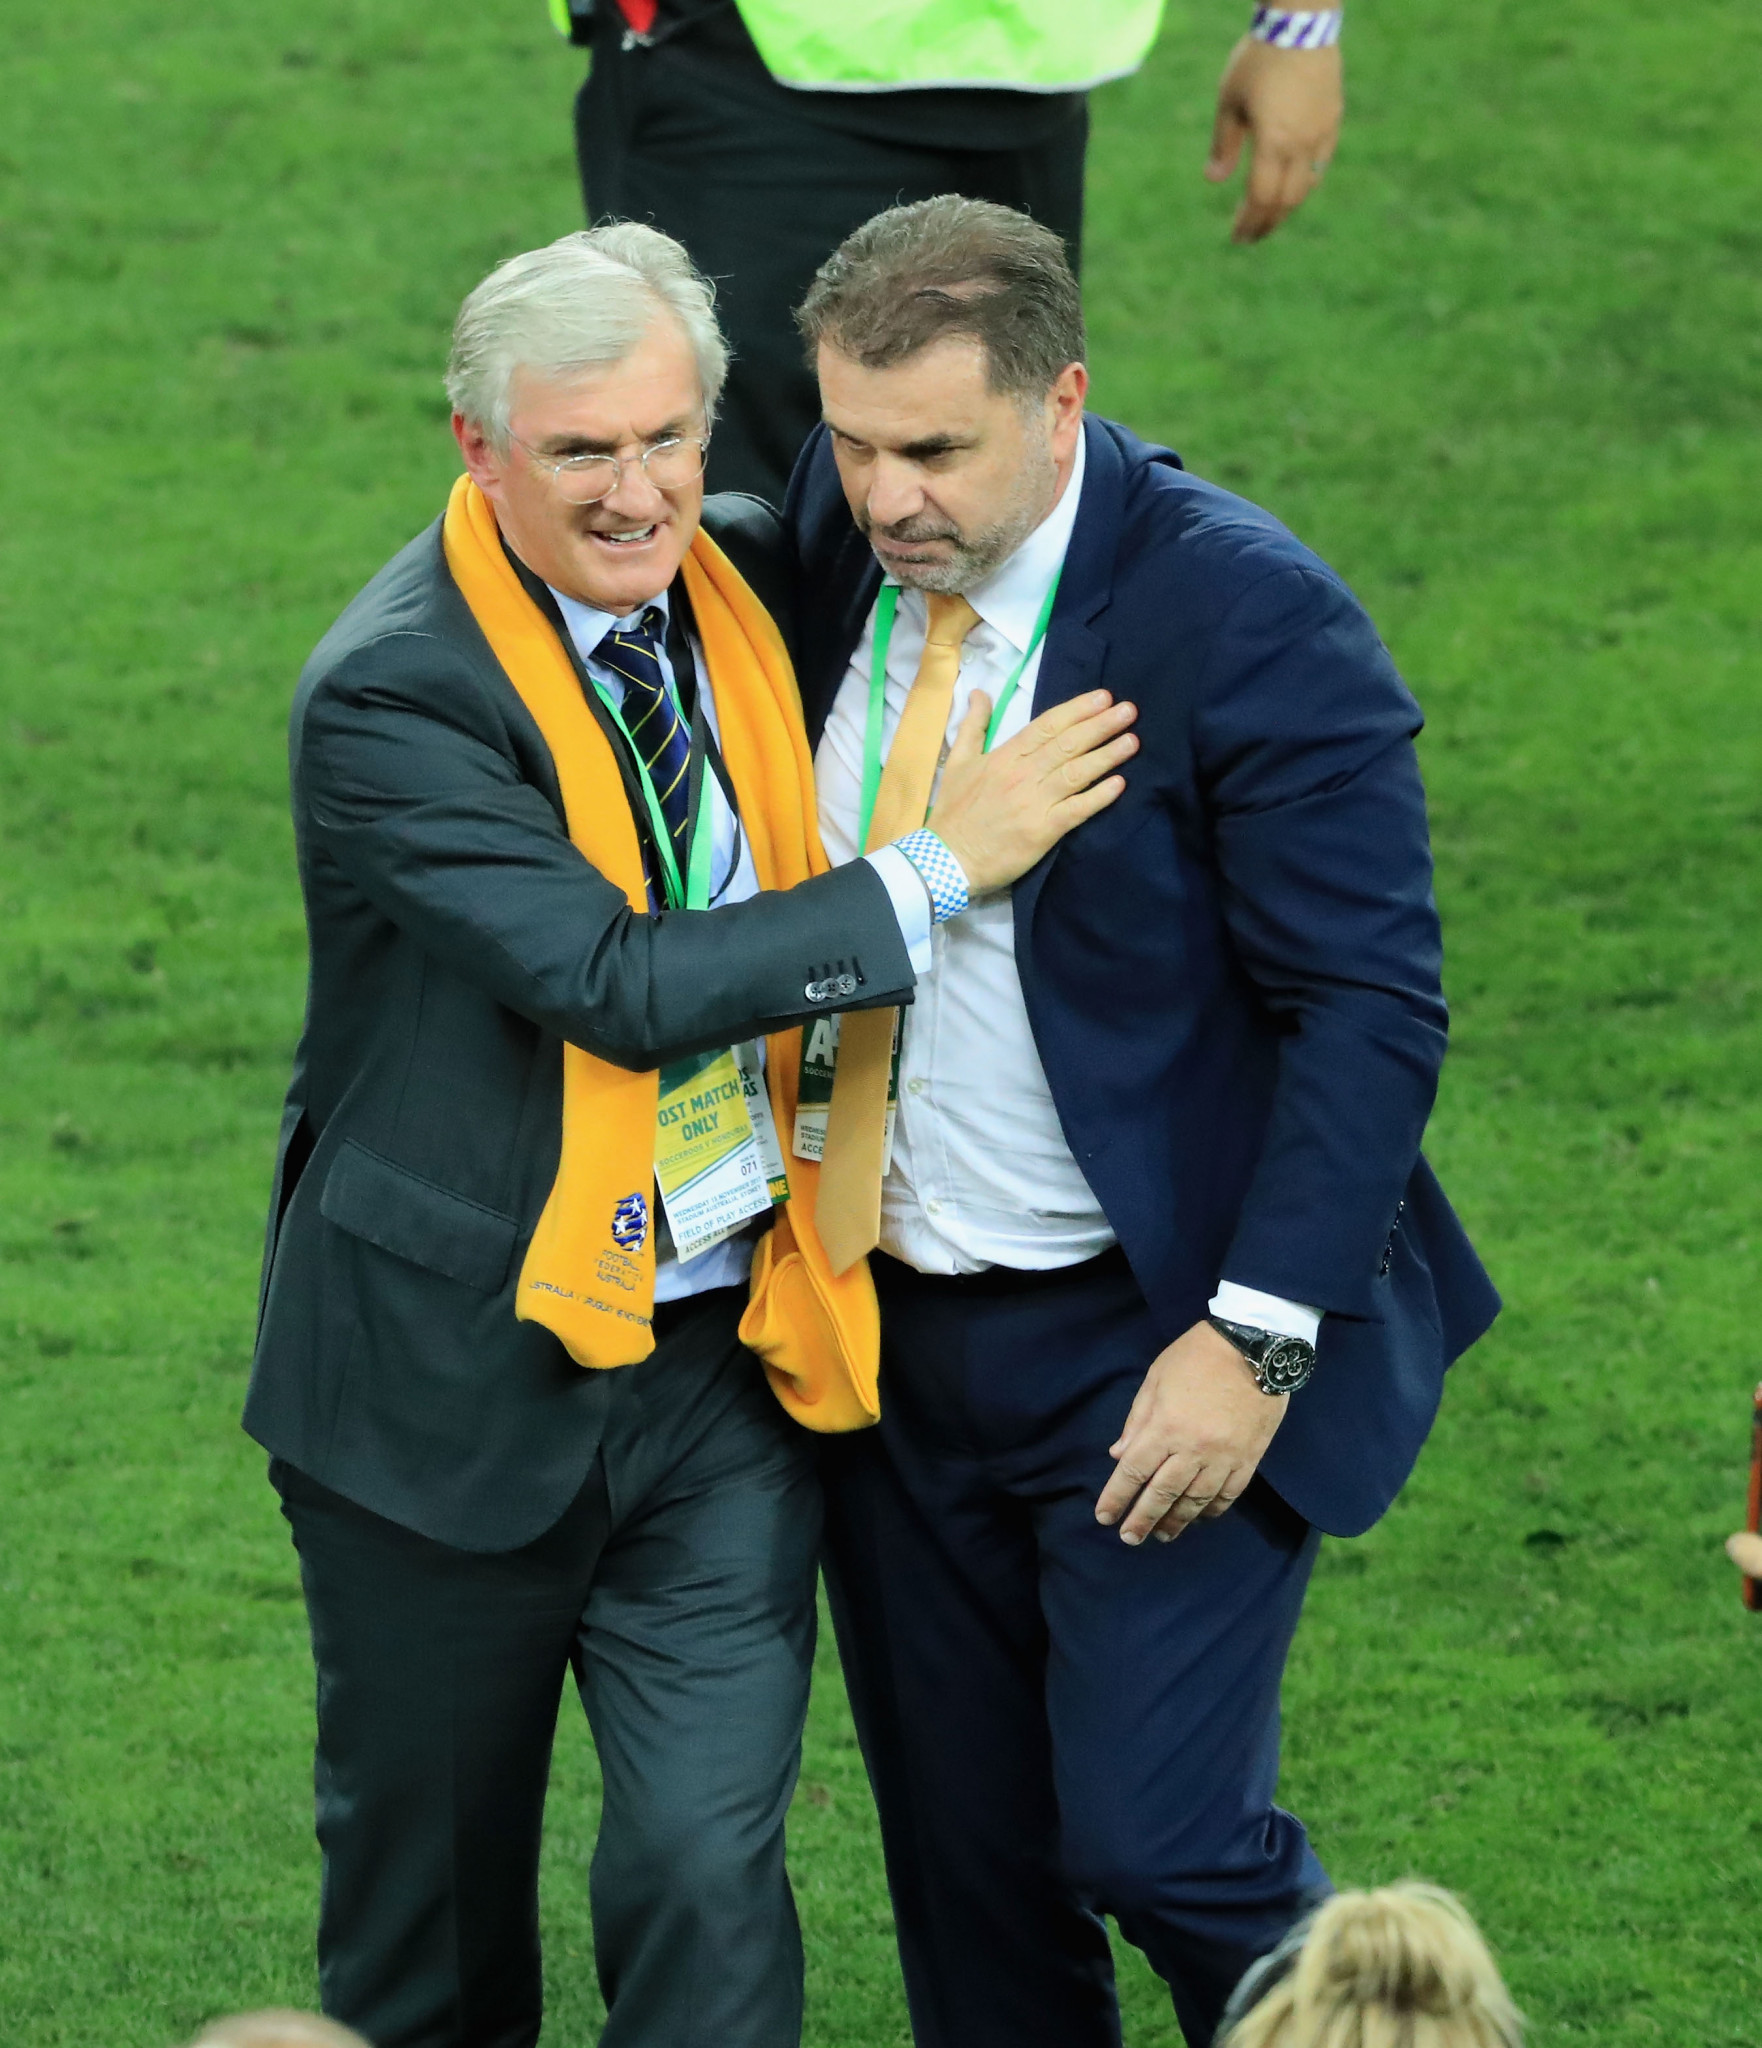 The failure to reform the Congress comes after national team coach Ange Postecoglou, right, resigned after guiding the team to the World Cup ©Getty Images